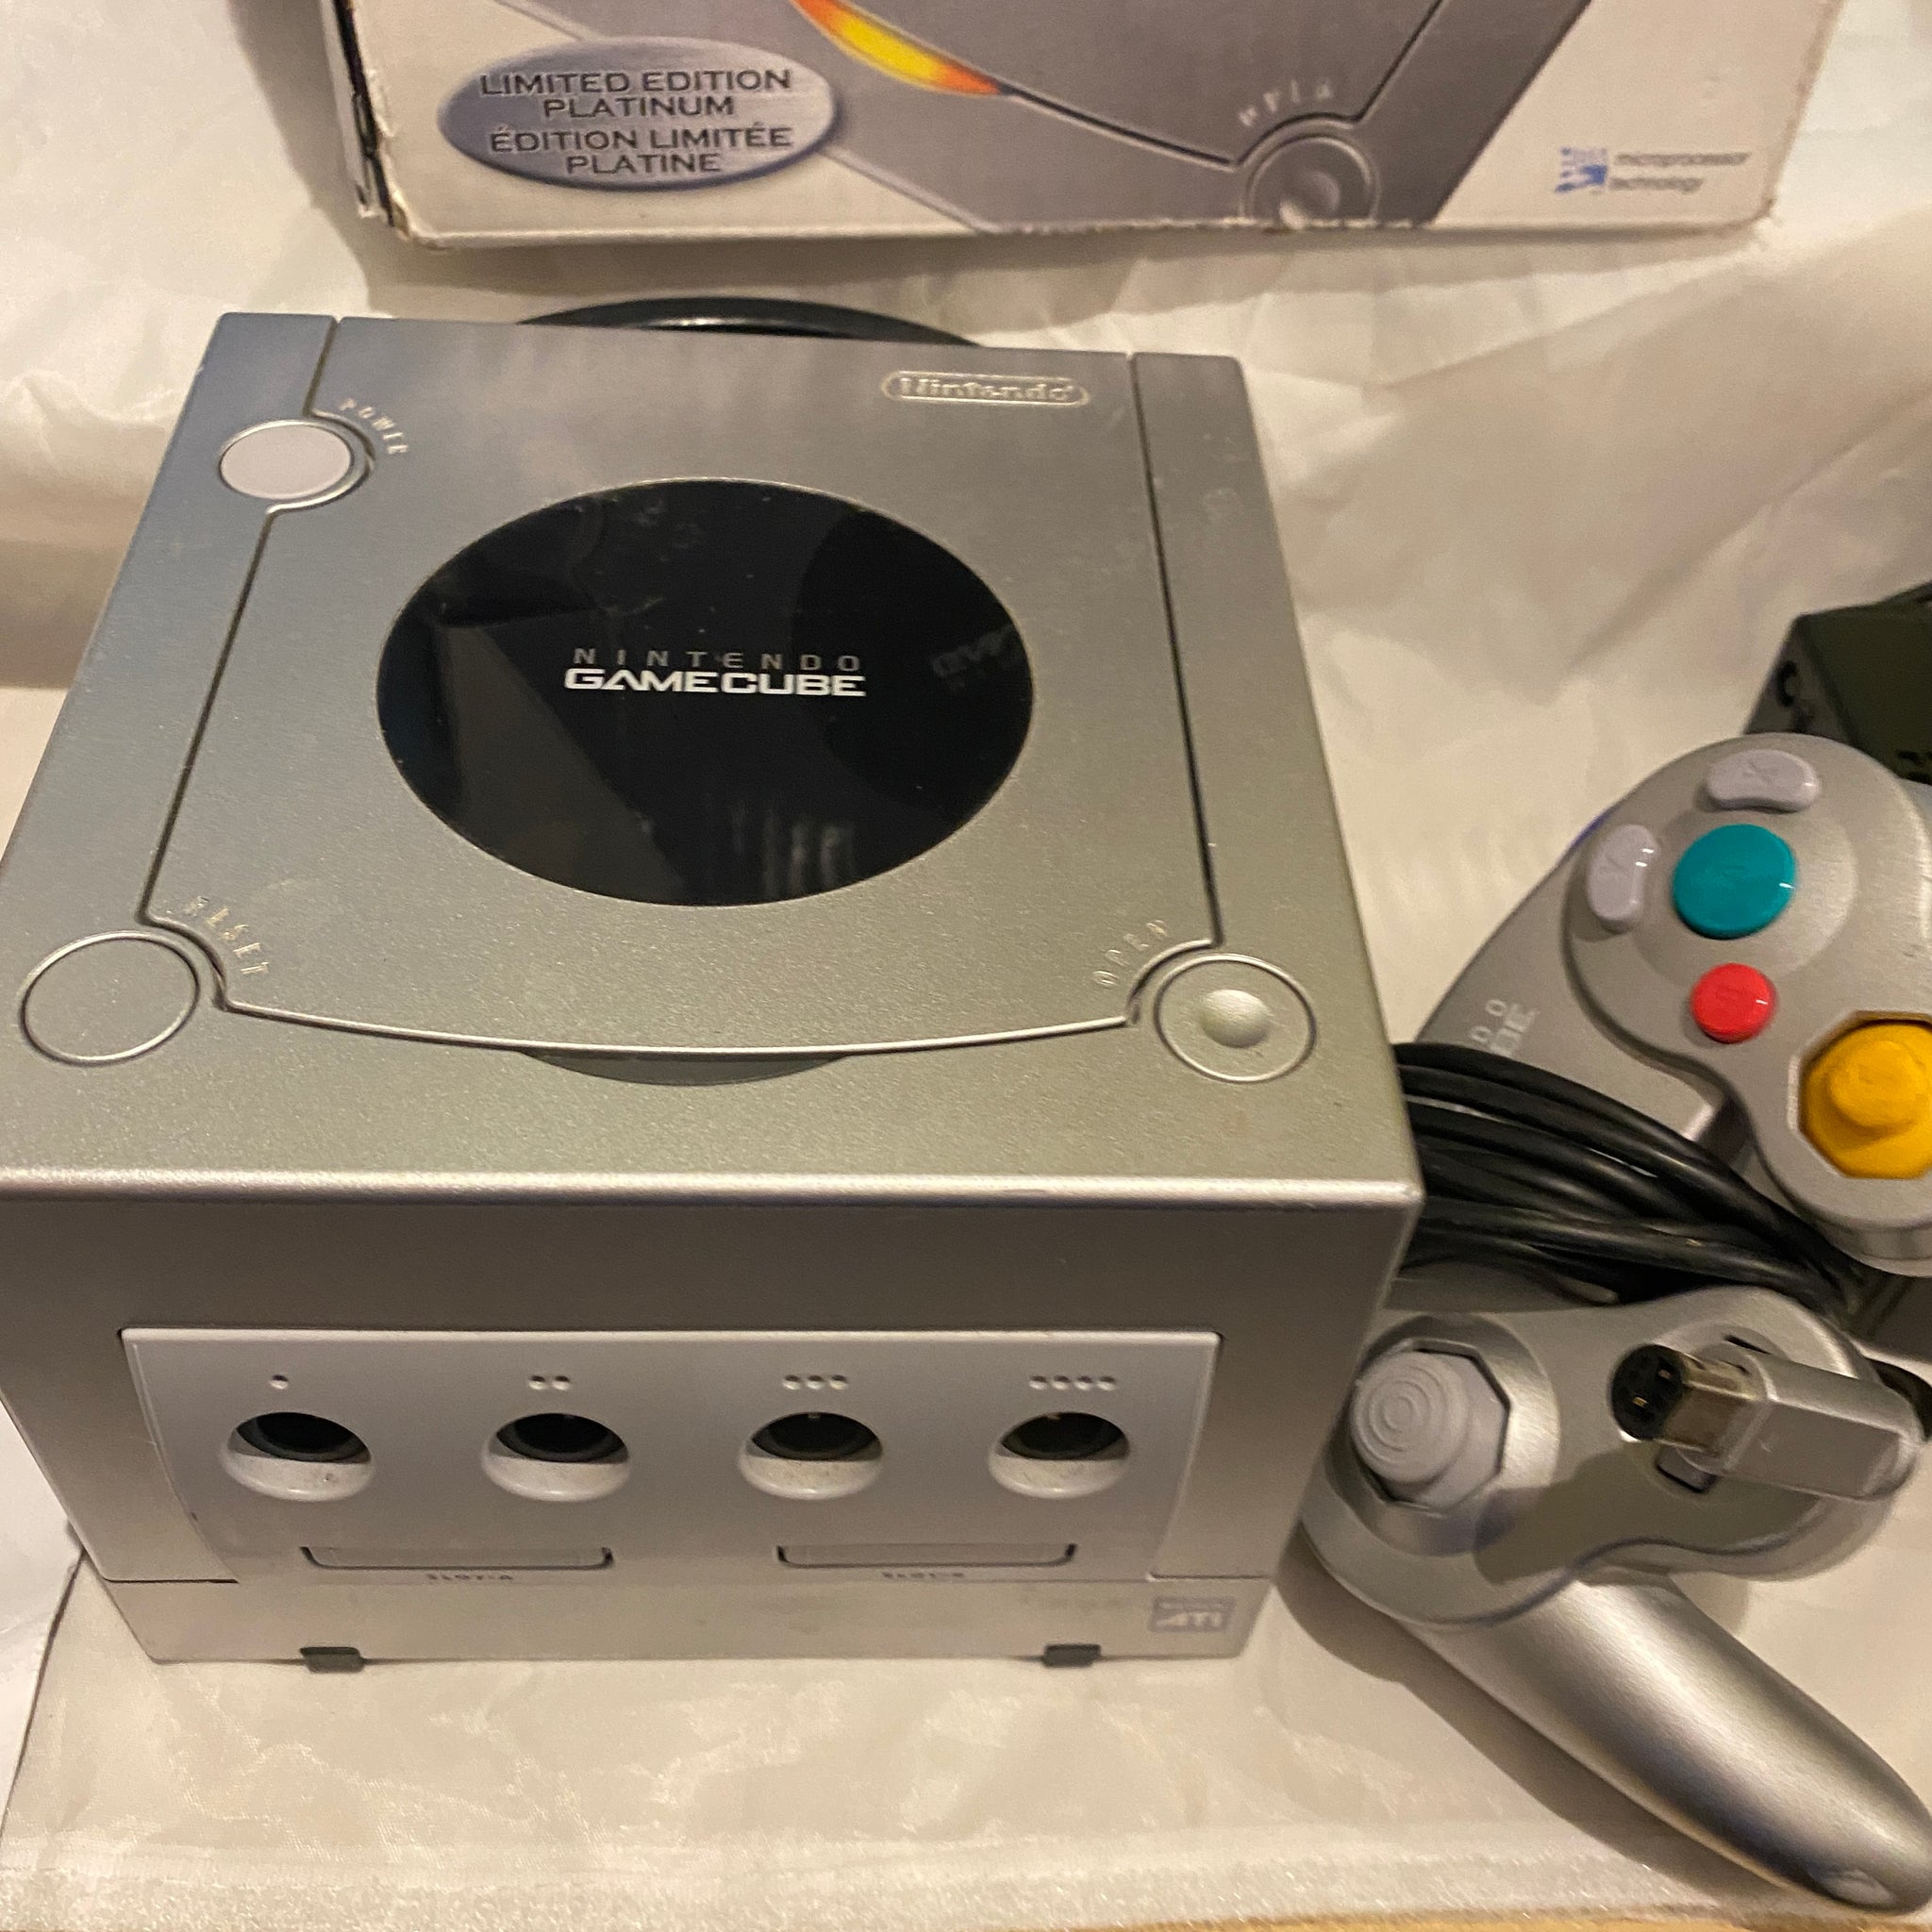 Buy Ntsc Platinum GameCube console boxed (north American) -@ 8BitBeyond